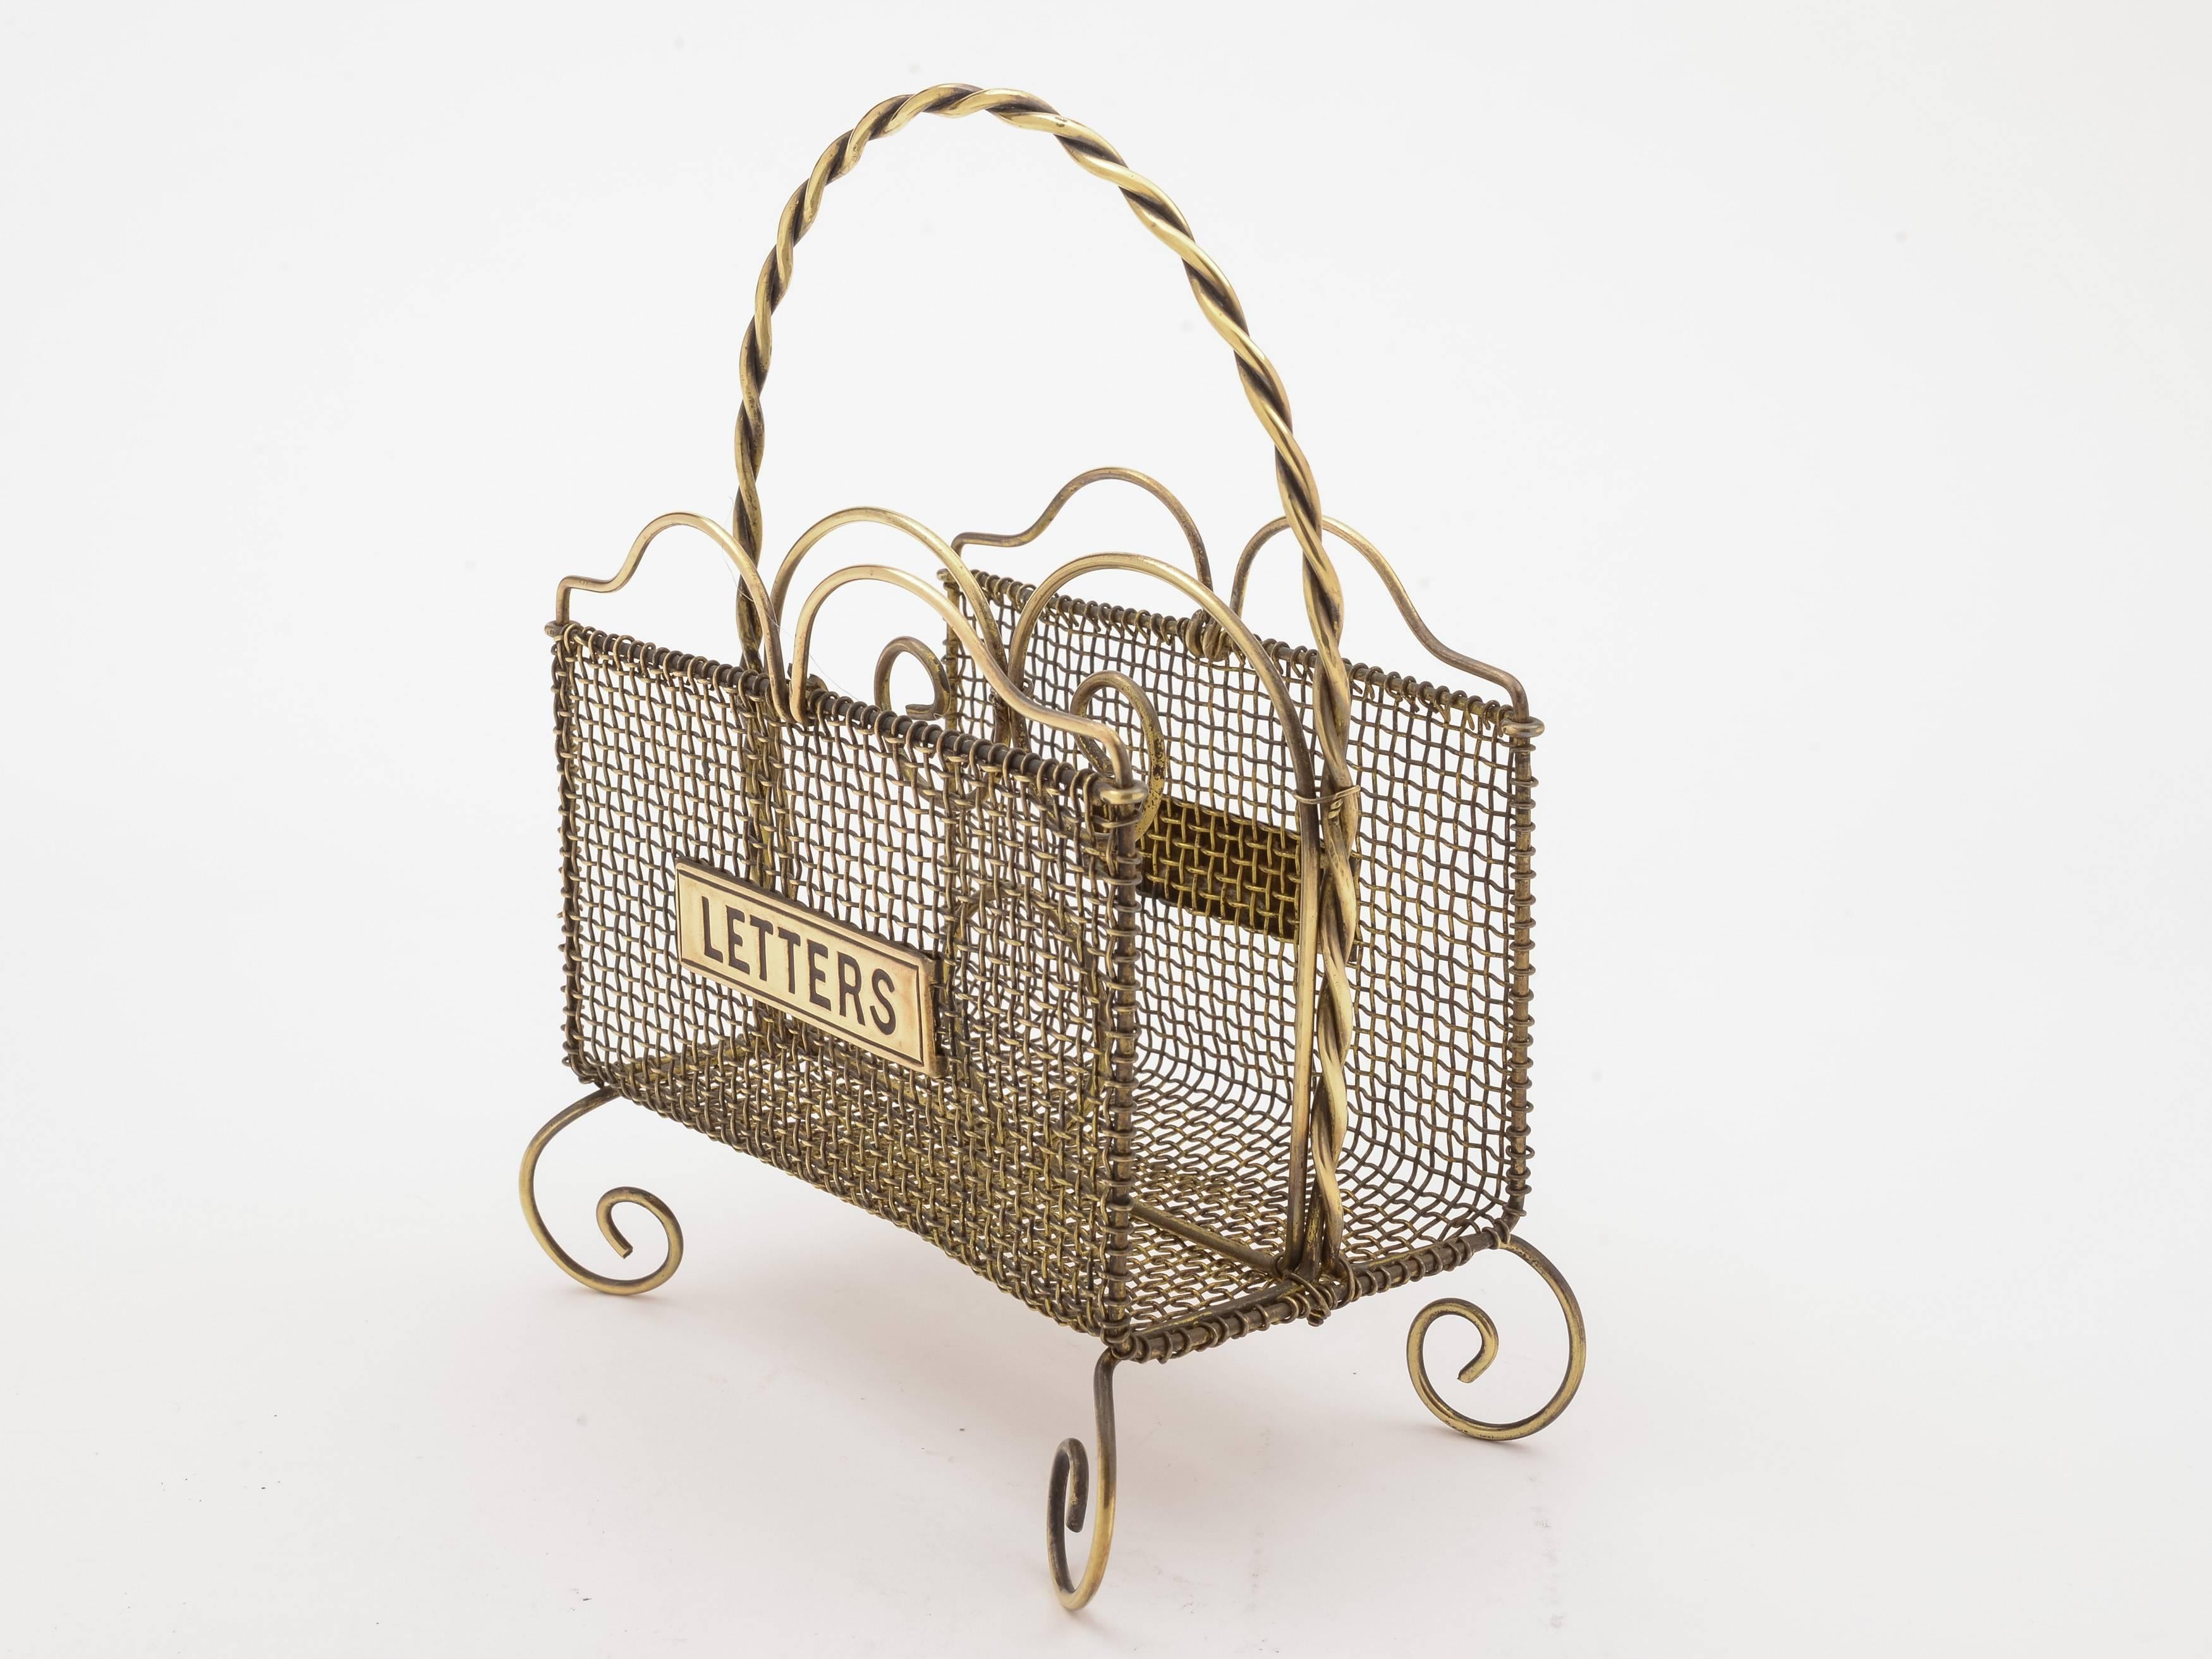 A lovely English Victorian brass wire-work letter rack with 'letters' plaque to each side, central carrying handle and two compartments for letters. Stands on four curled feet, circa 1890.

Measurements:
Height (including handle): 7